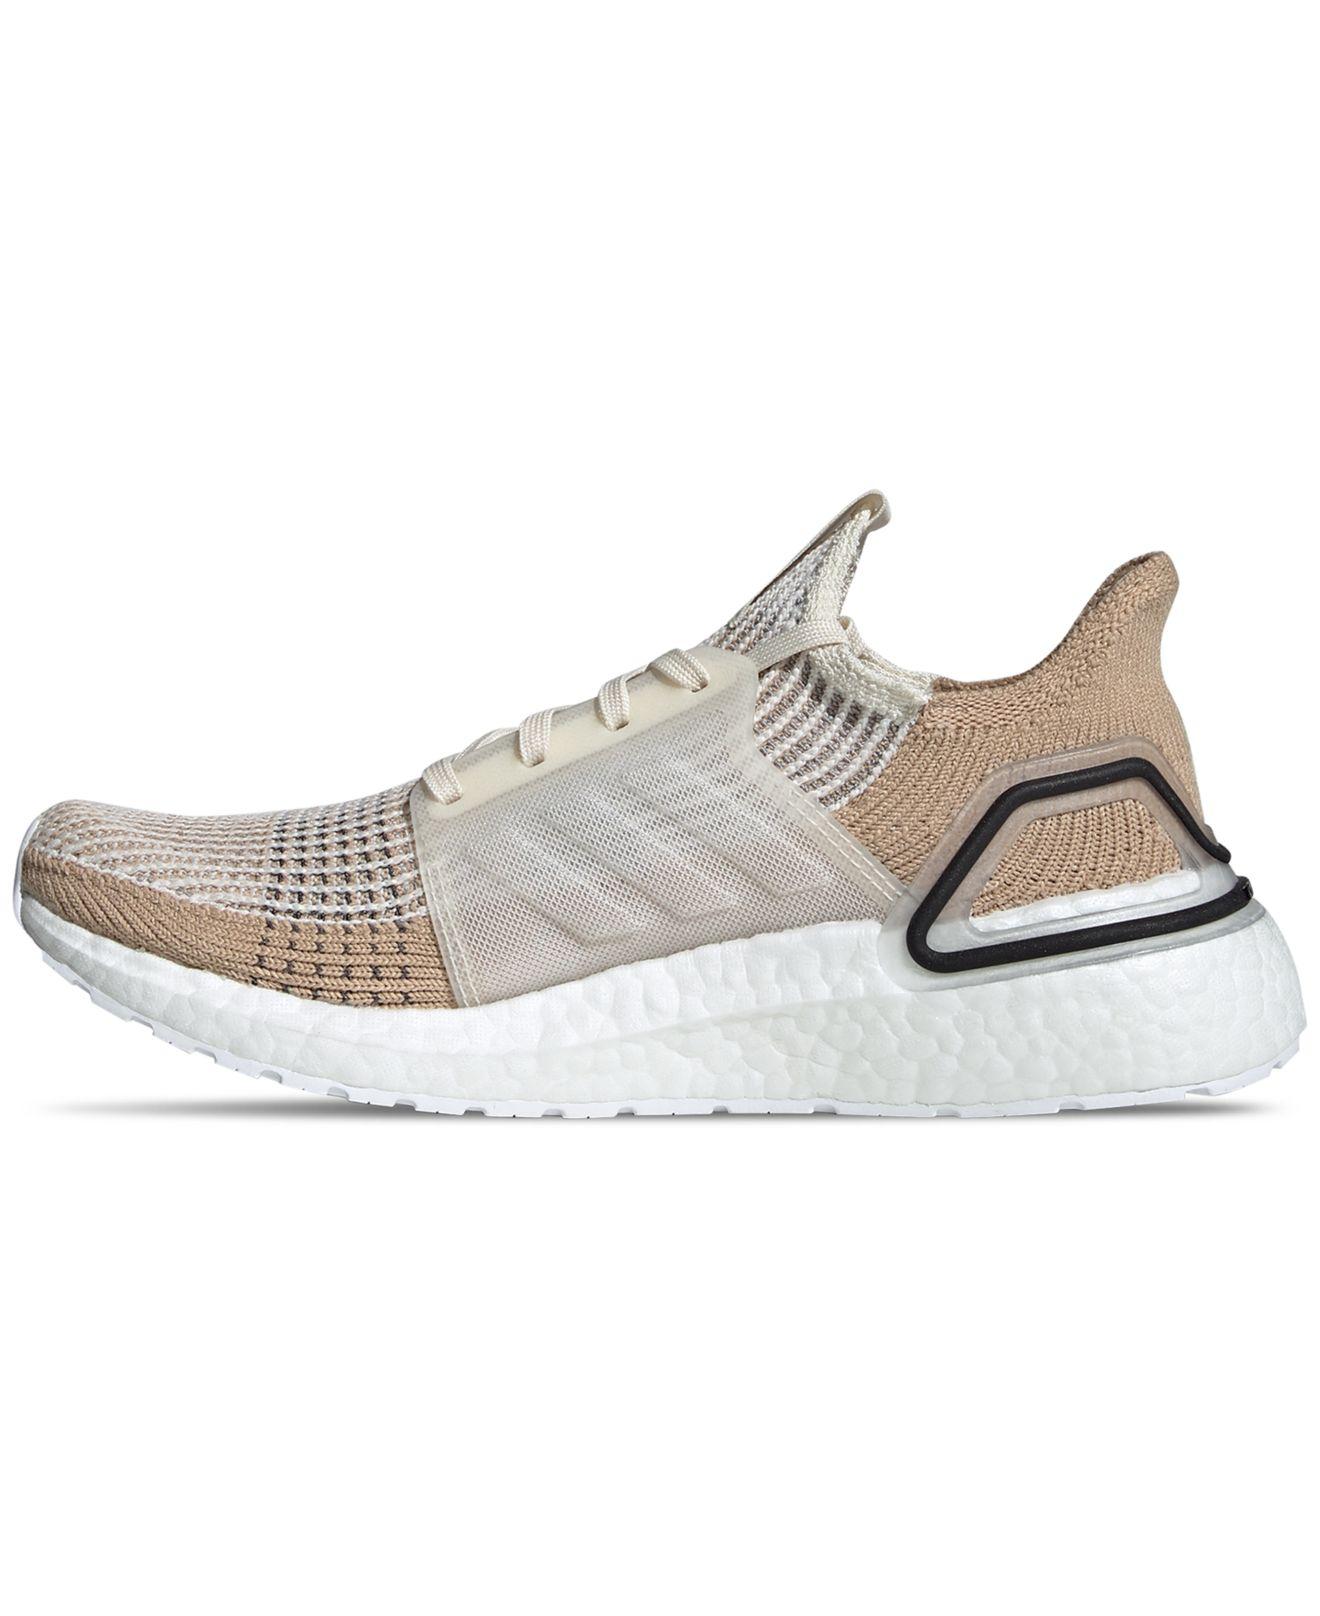 adidas Rubber Beige Ultraboost 19w Sneakers in Chalk White (Natural) | Lyst